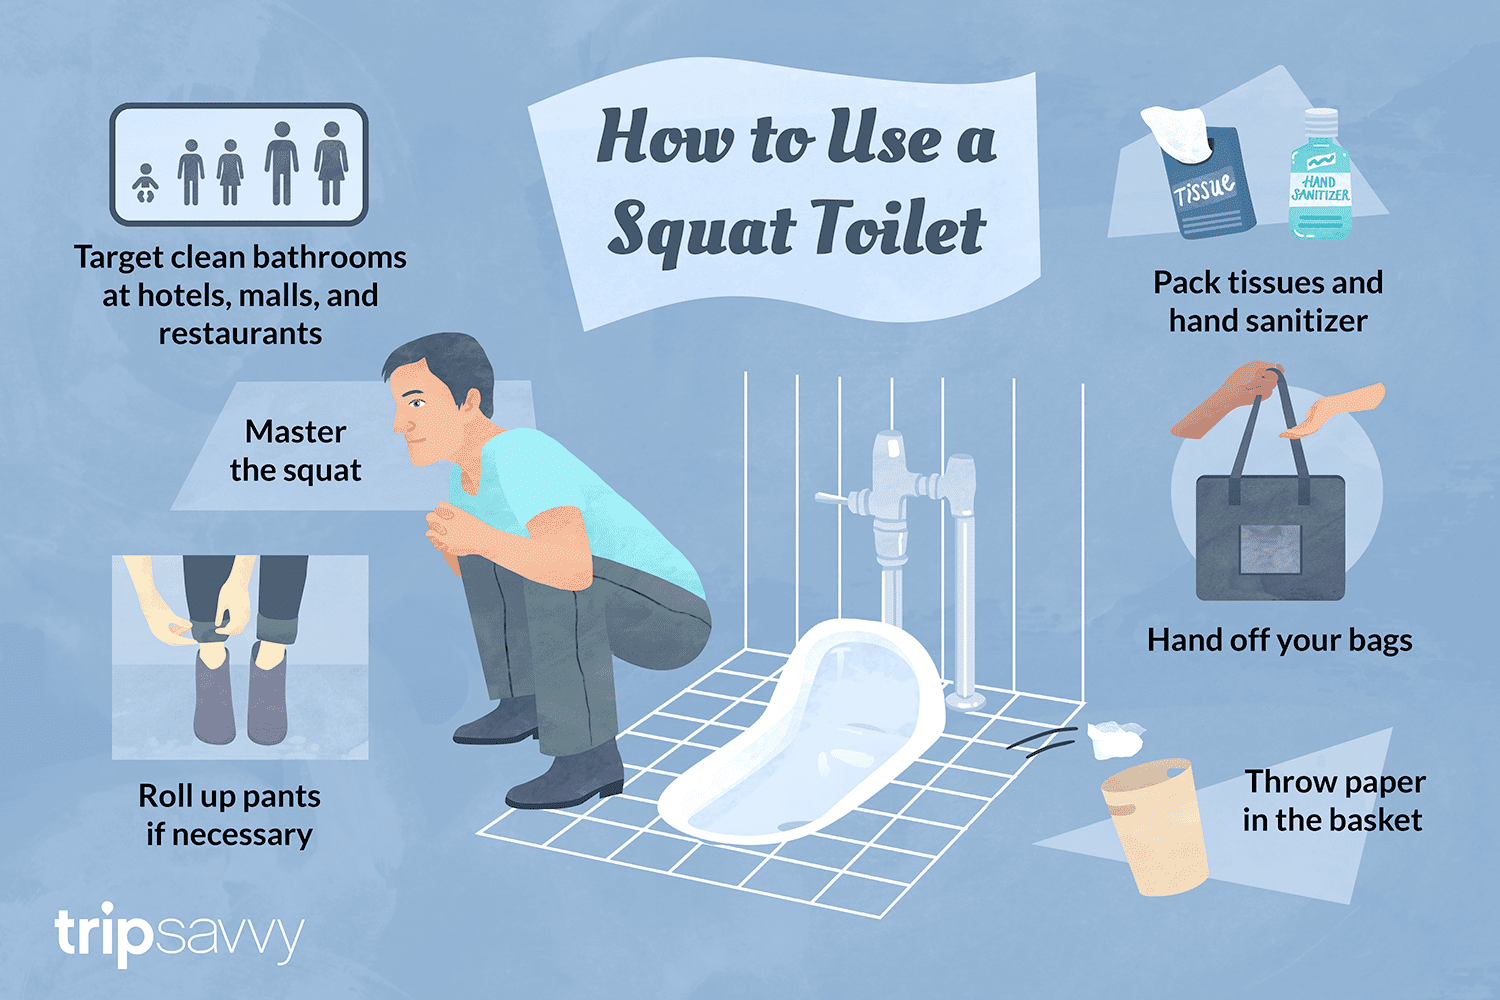 [Chuyện toilet] Part 1 - Toilet ở Trung Quốc - How to use a squat toilet in China